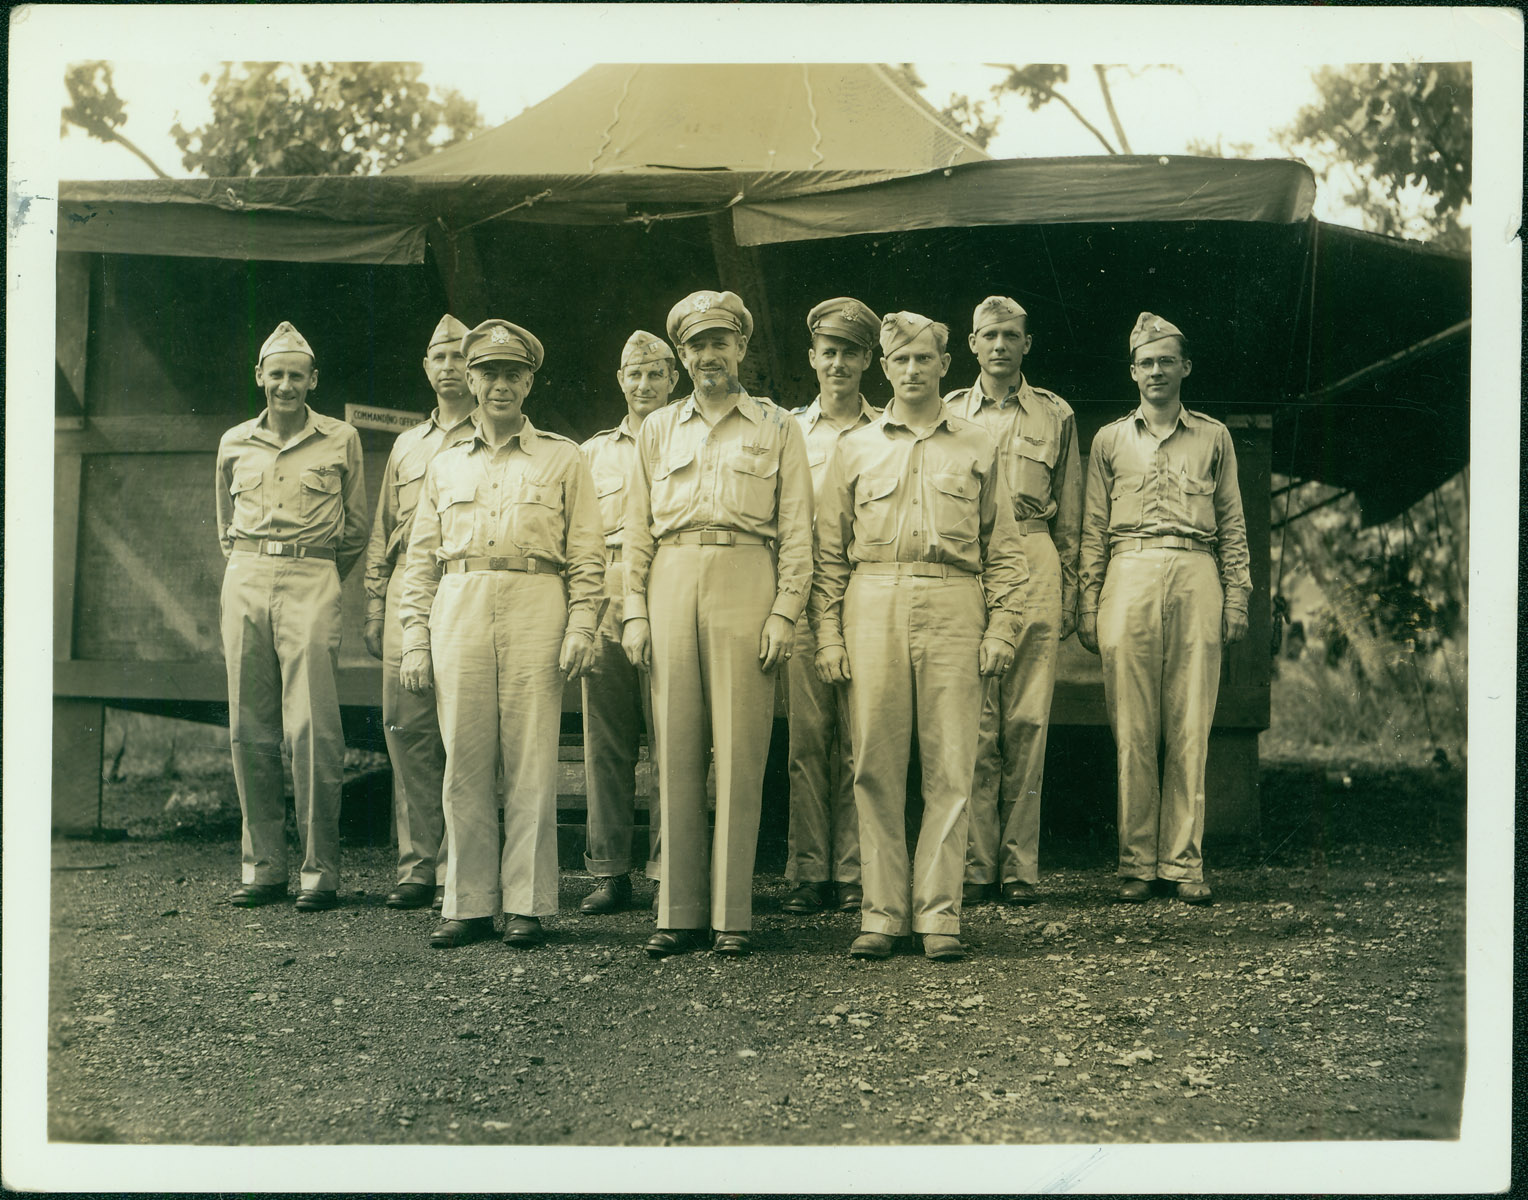 A group photo of Robert Merchant’s unit while stationed in the Pacific. Merchant stands at the far right. The officer far left, front row is Lt. Gen. George Kenney, Officer Commanding 5th Air Force. The first from the left in the back row is Colonel Ralph Koon and the fourth from the left in the back row is Lt. Colonel Art Rogers.